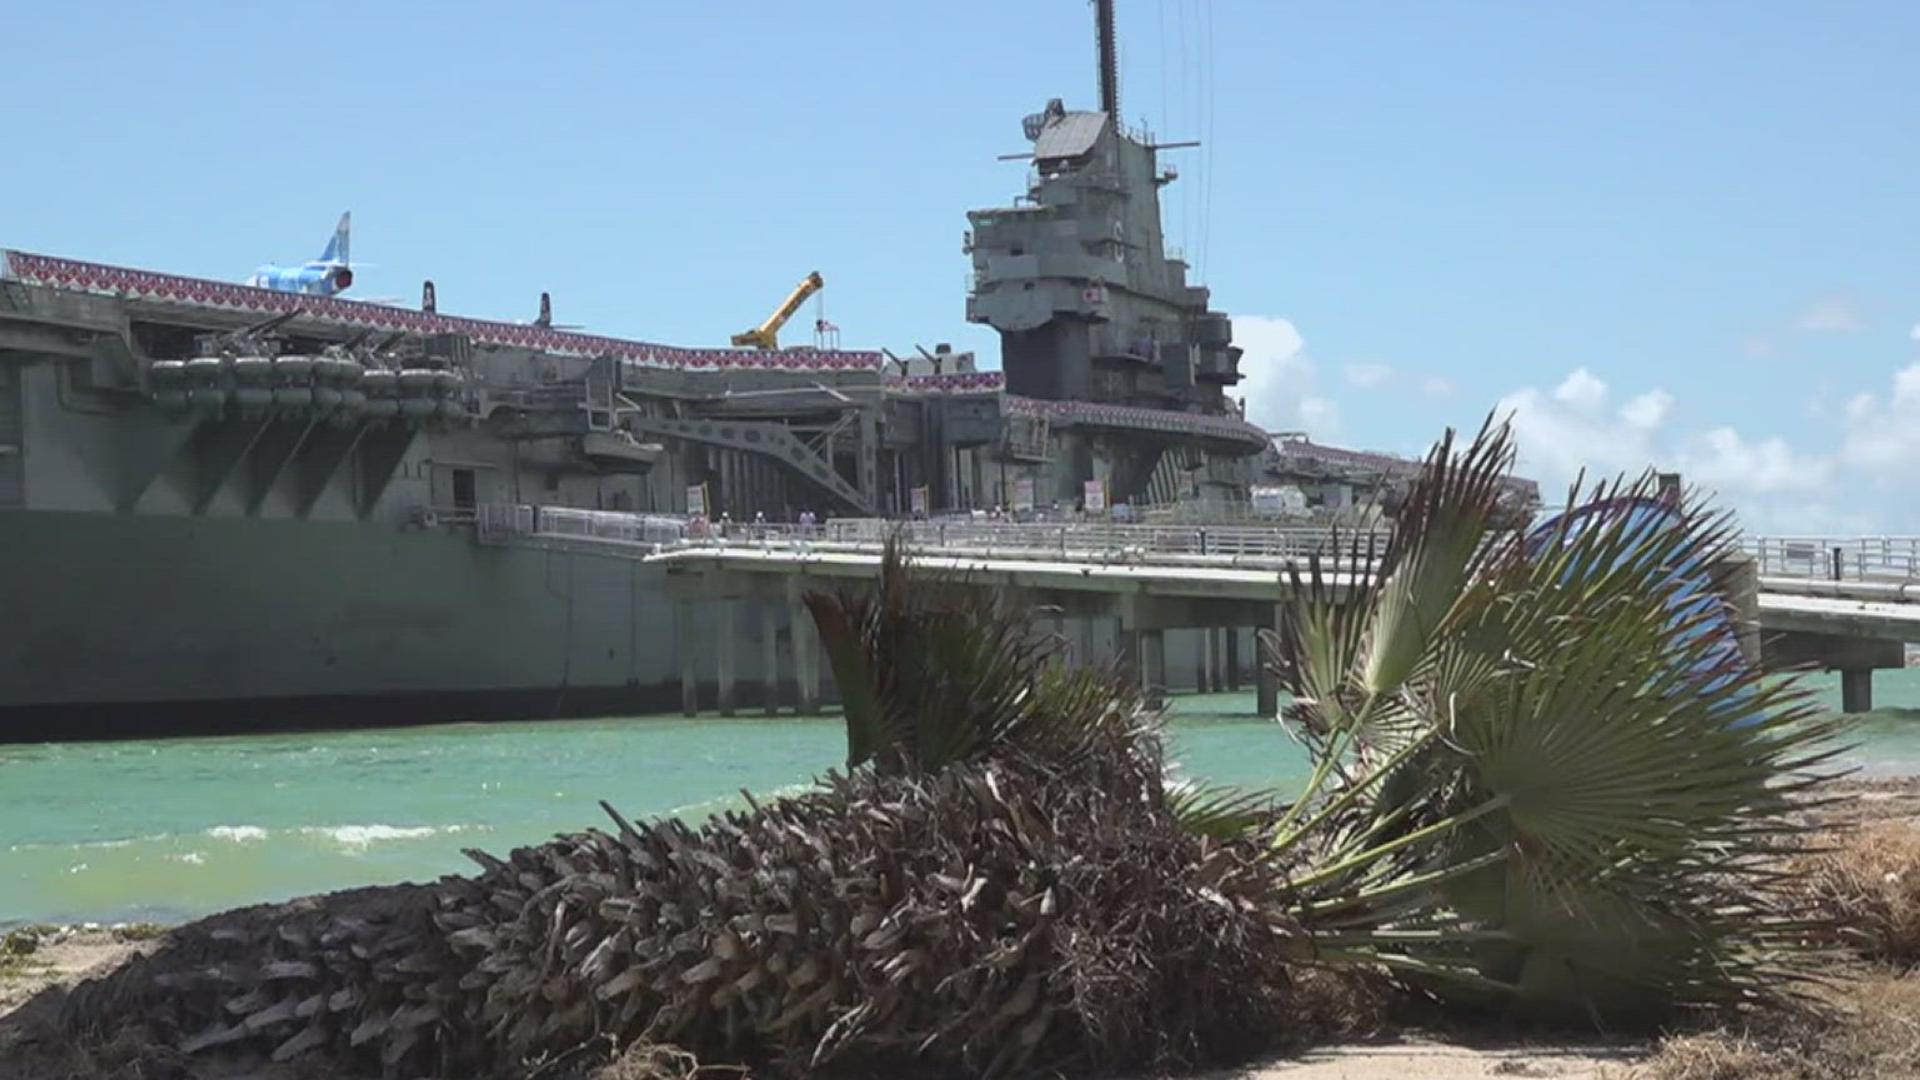 The USS Lexington Museum reopened to the public Monday after it was closed five days due to the storm, resulting in a financial loss for the attraction.